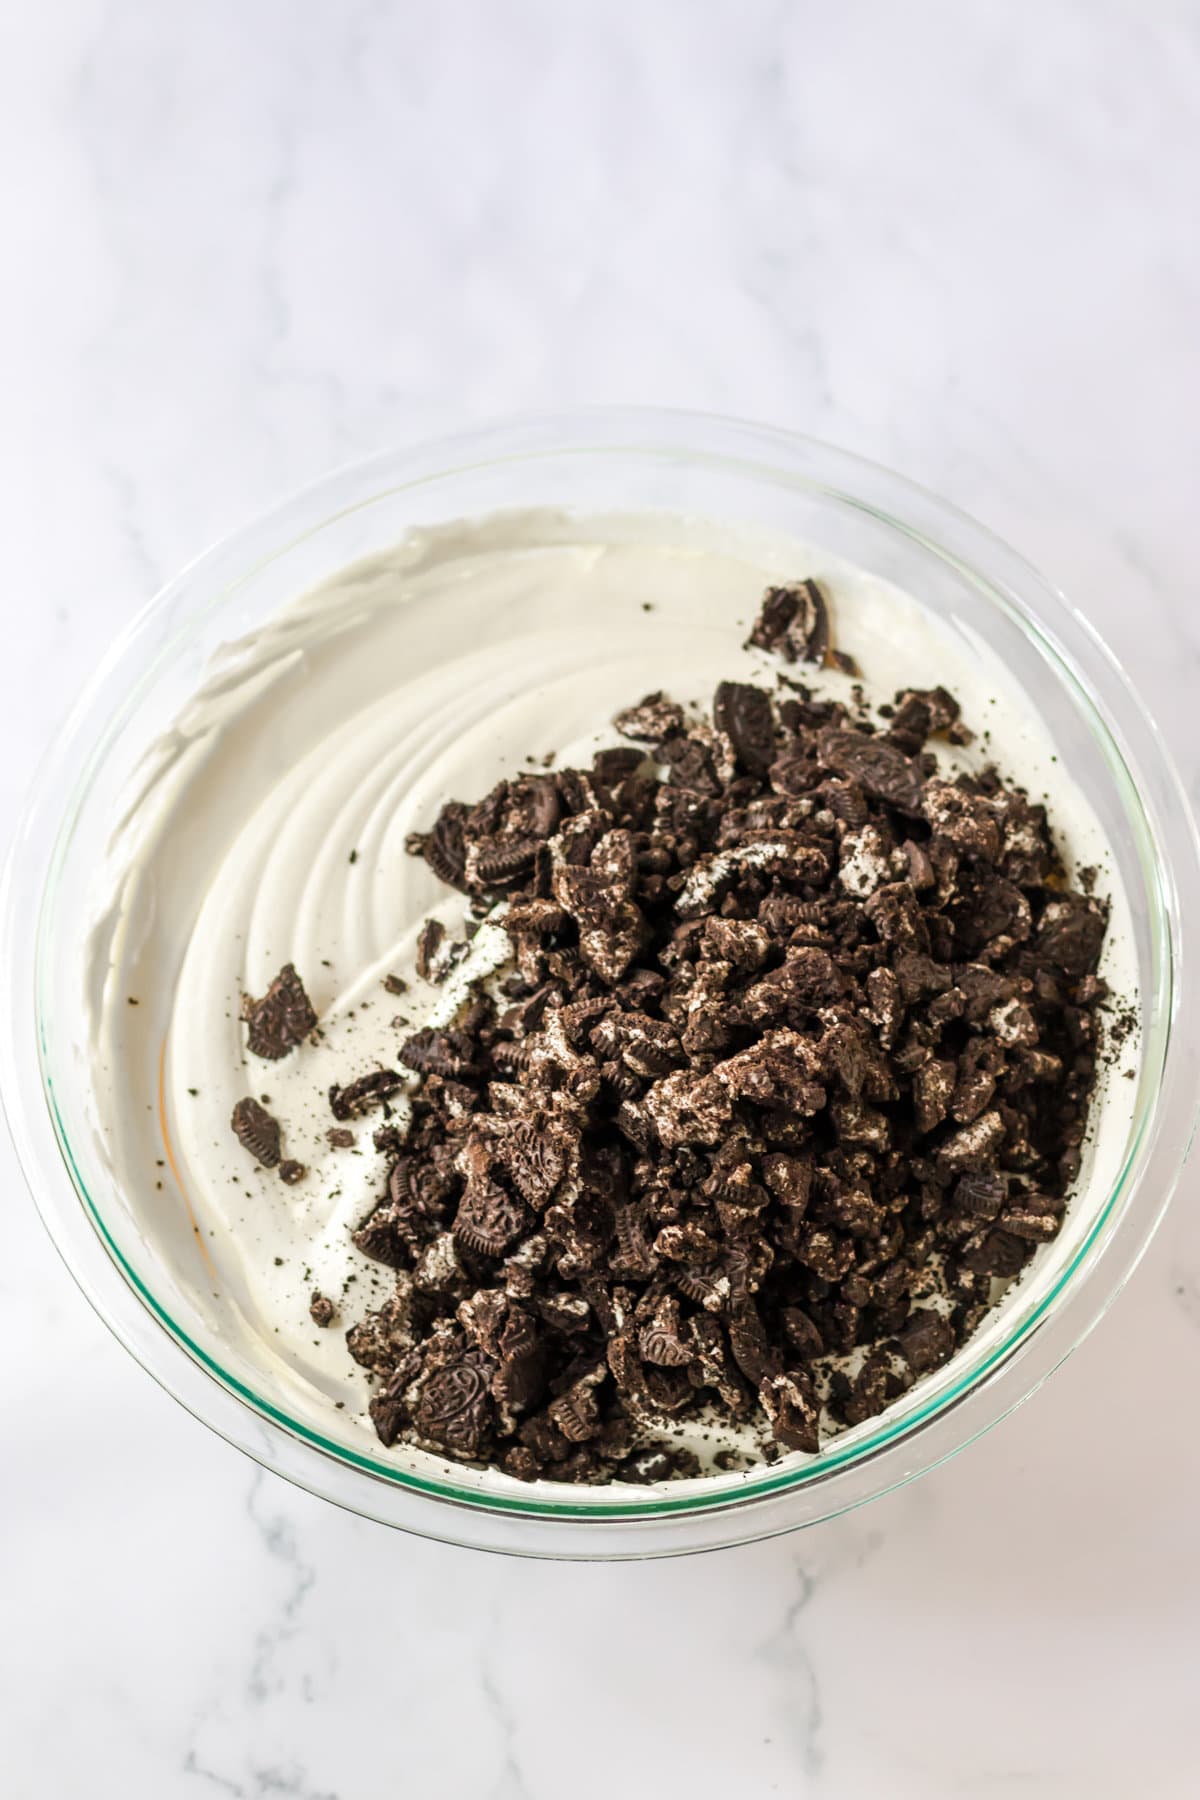 Crushed Oreo Cookies added to the mixing bowl with the creamy pudding and cool whip mixture.